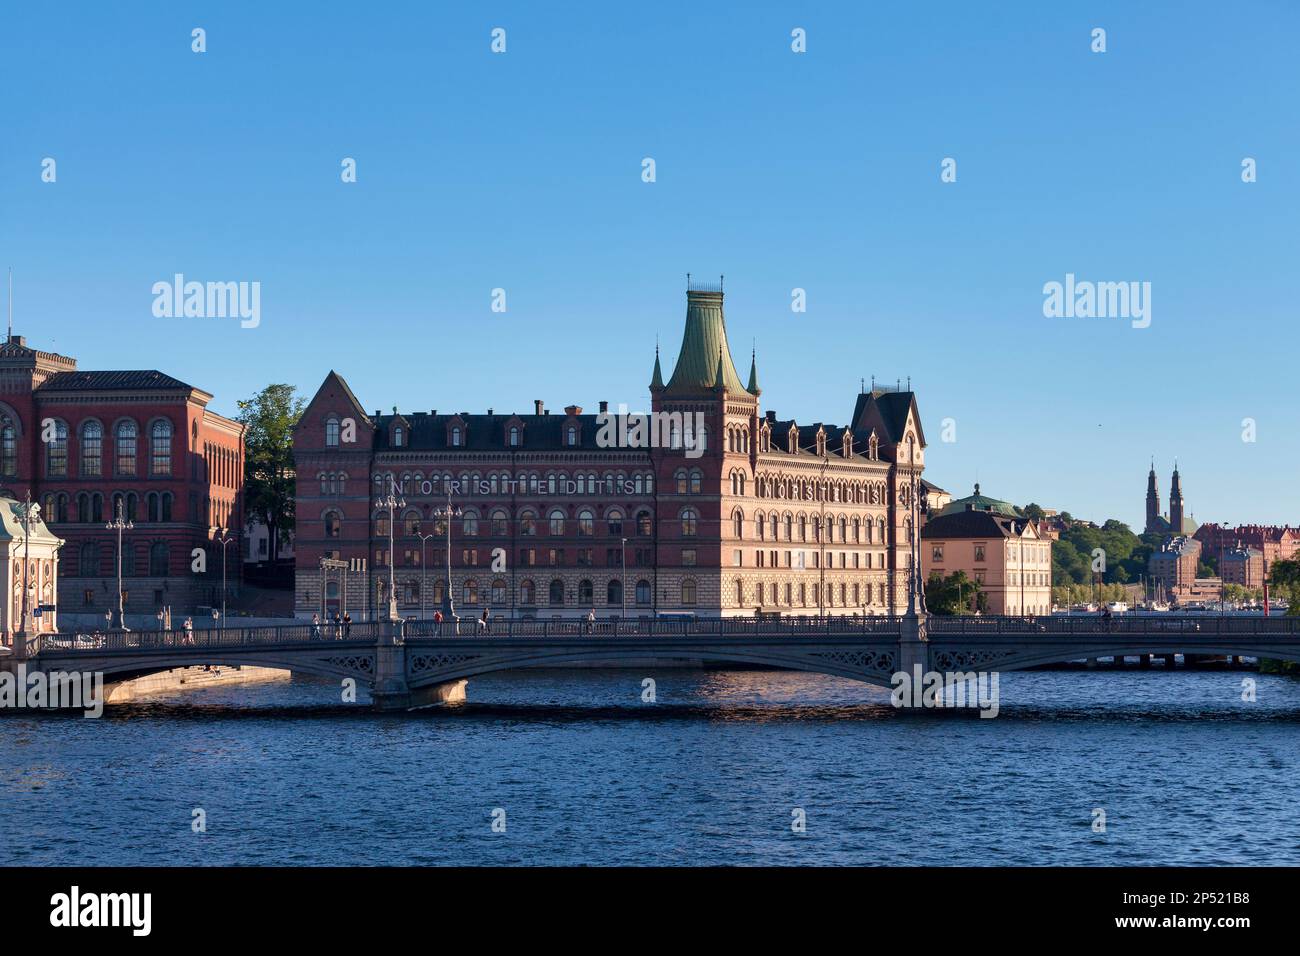 Stockholm, Sweden - June 22 2019: Building of the oldest publishing house, Norstedts Förlag. It was founded in 1823 by Per Adolf Norstedt. Stock Photo